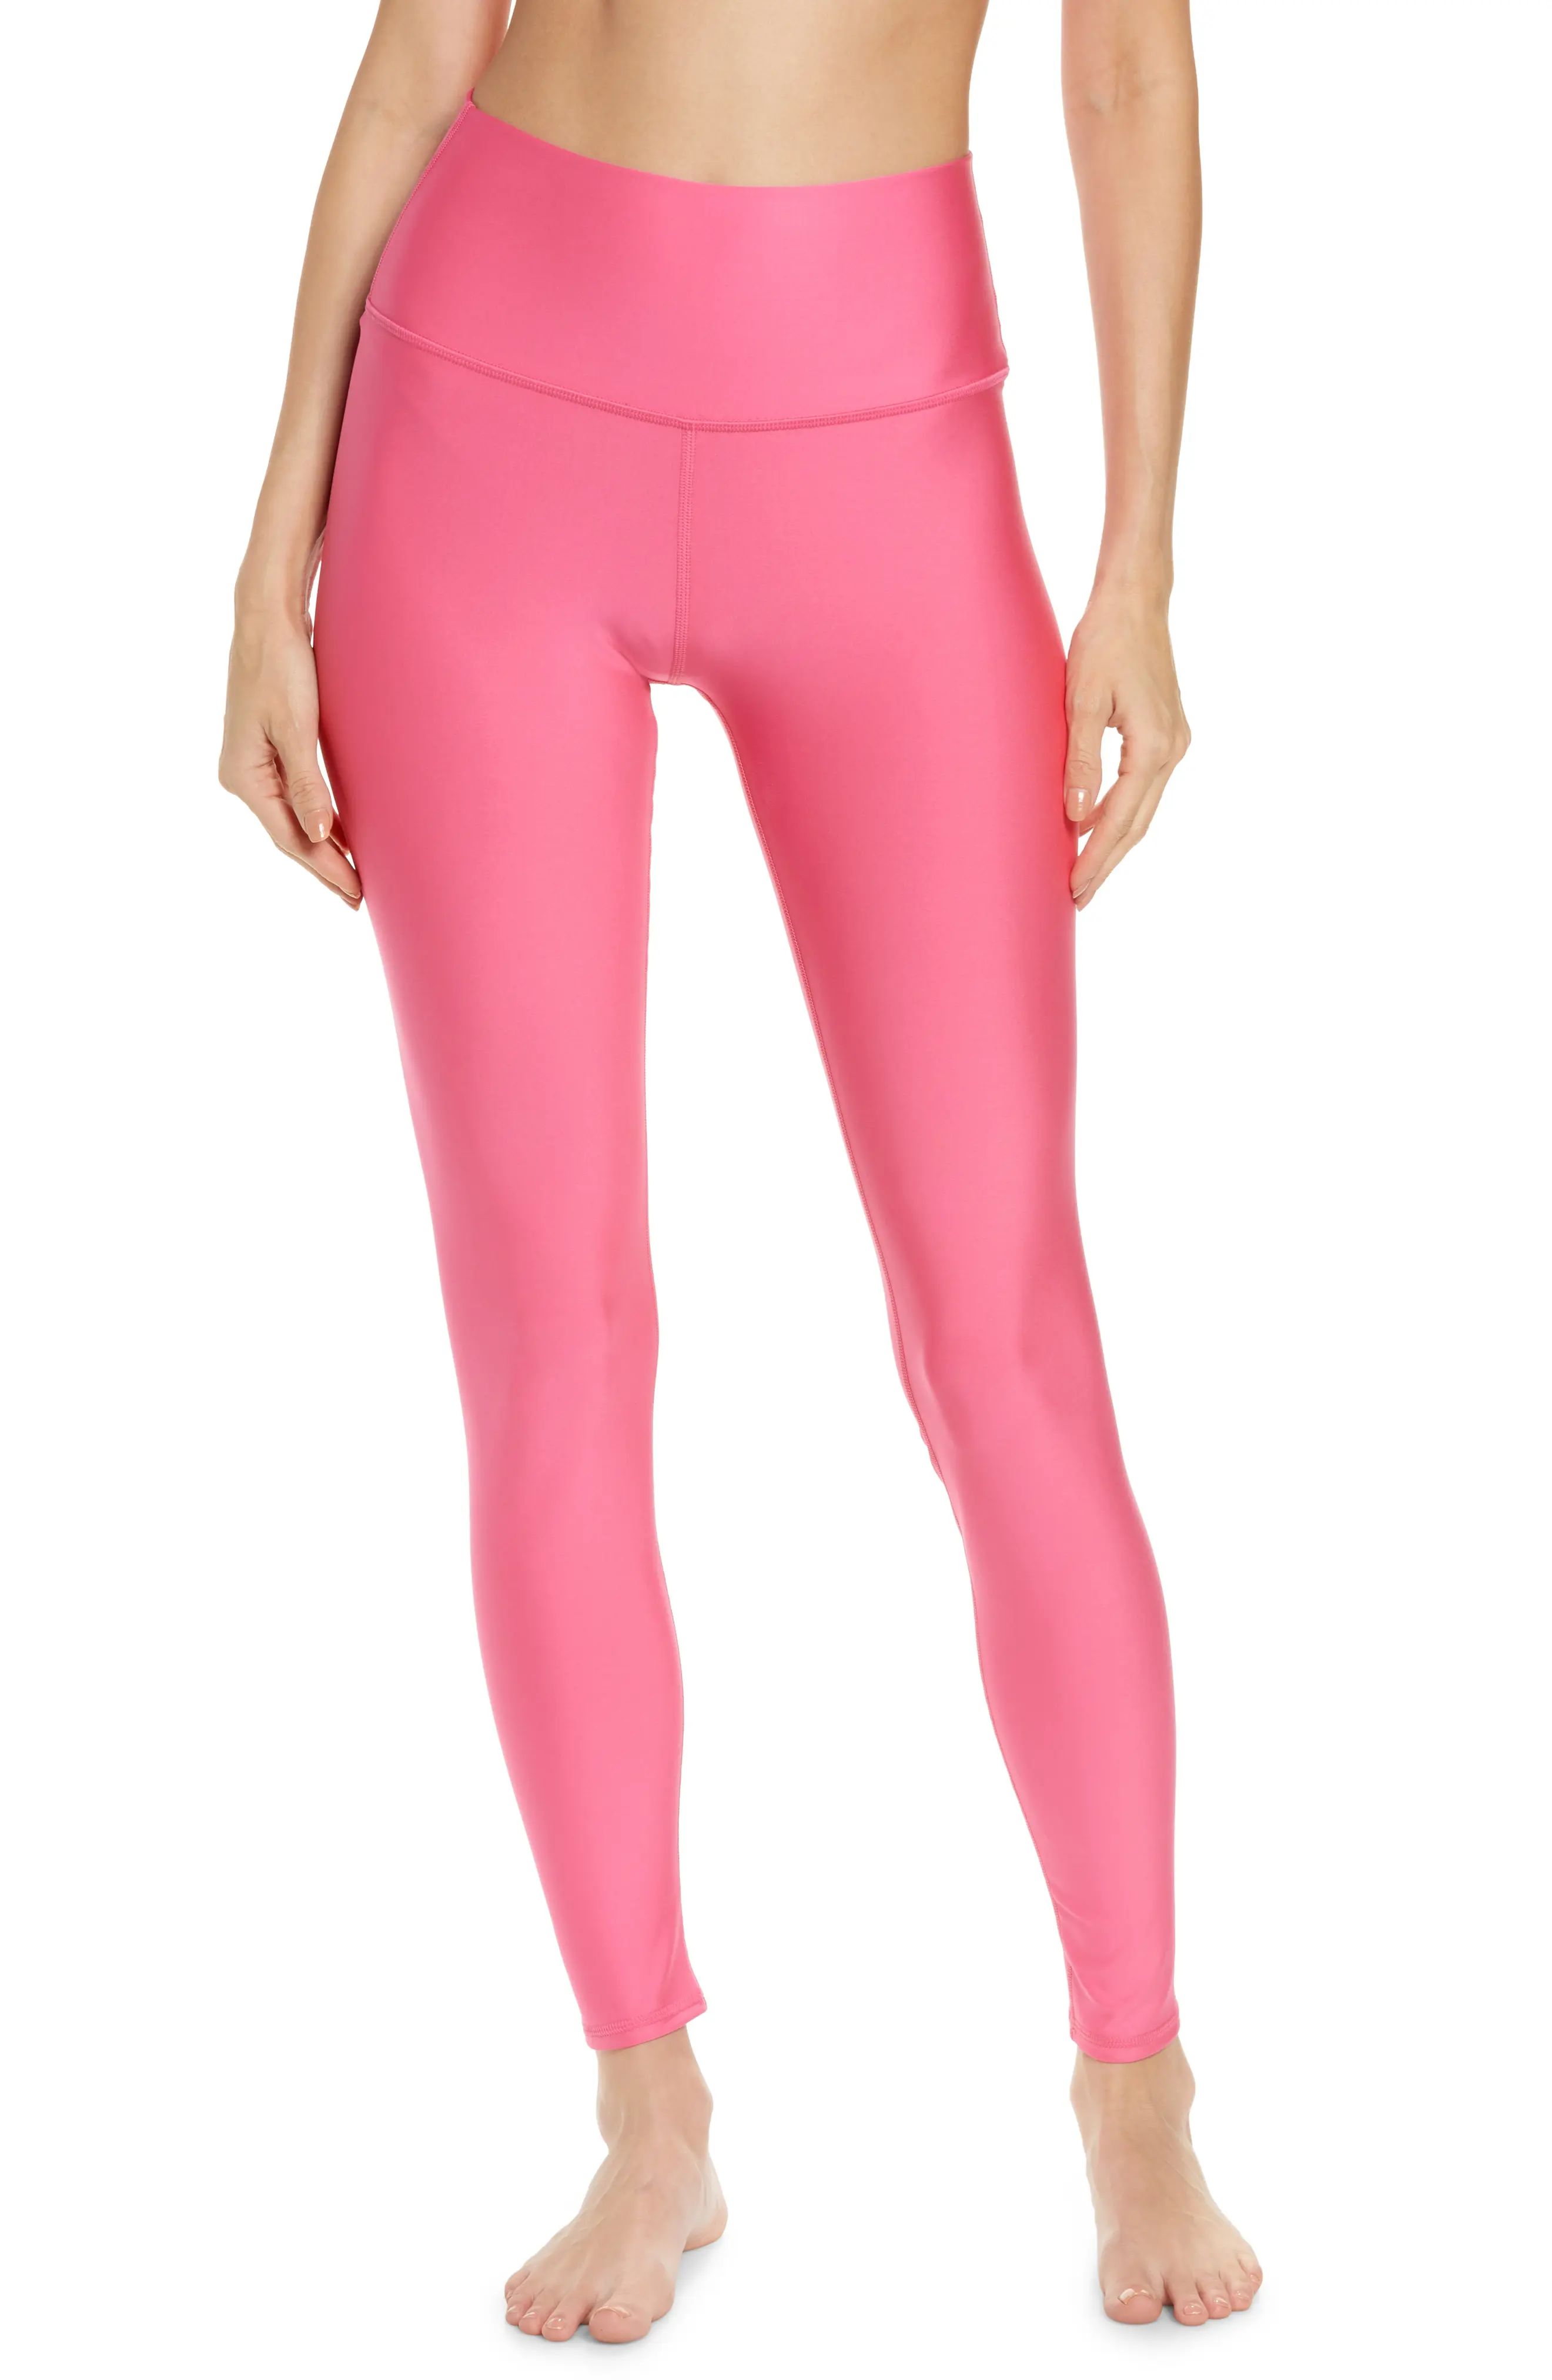 Alo Airlift High Waist Leggings in Pink Fuchsia at Nordstrom, Size Medium | Nordstrom